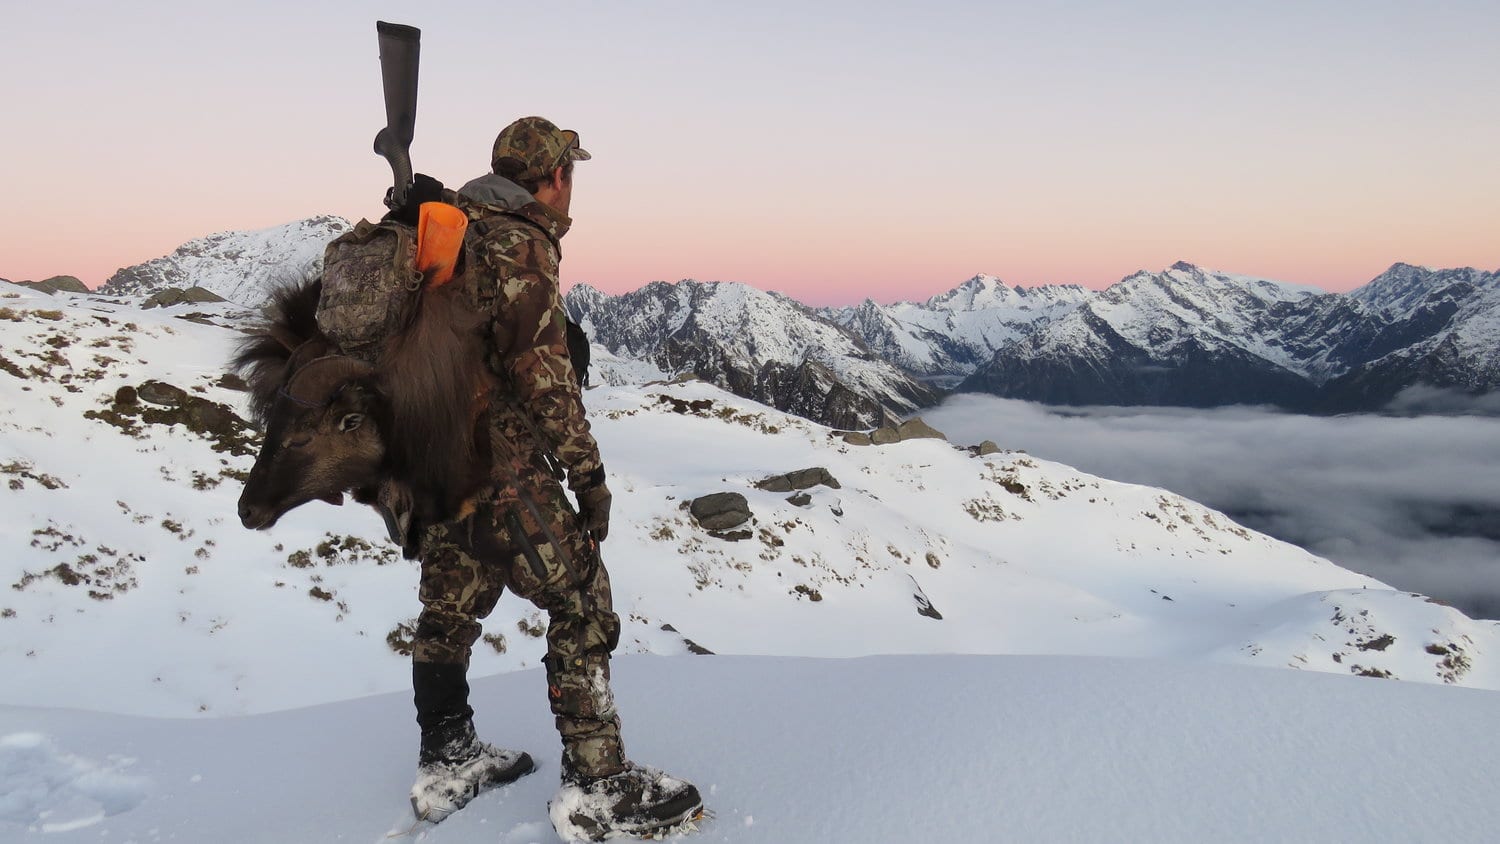 Hunter packing out a tahr during the winter New Zealand hunting season.